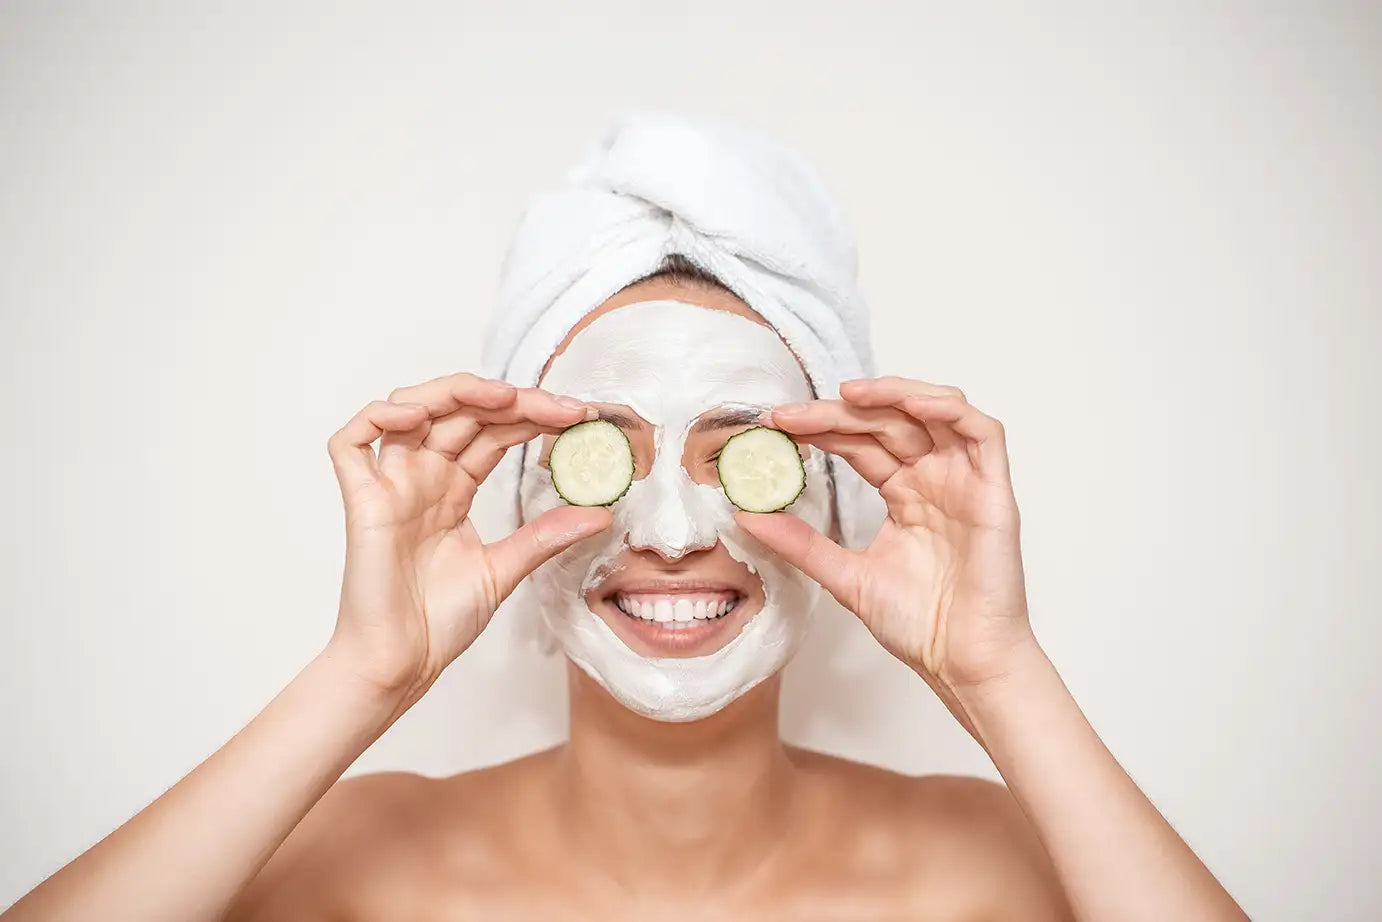 stock image of a person wearing a yogurt facemask and covering eyes with cucumbers